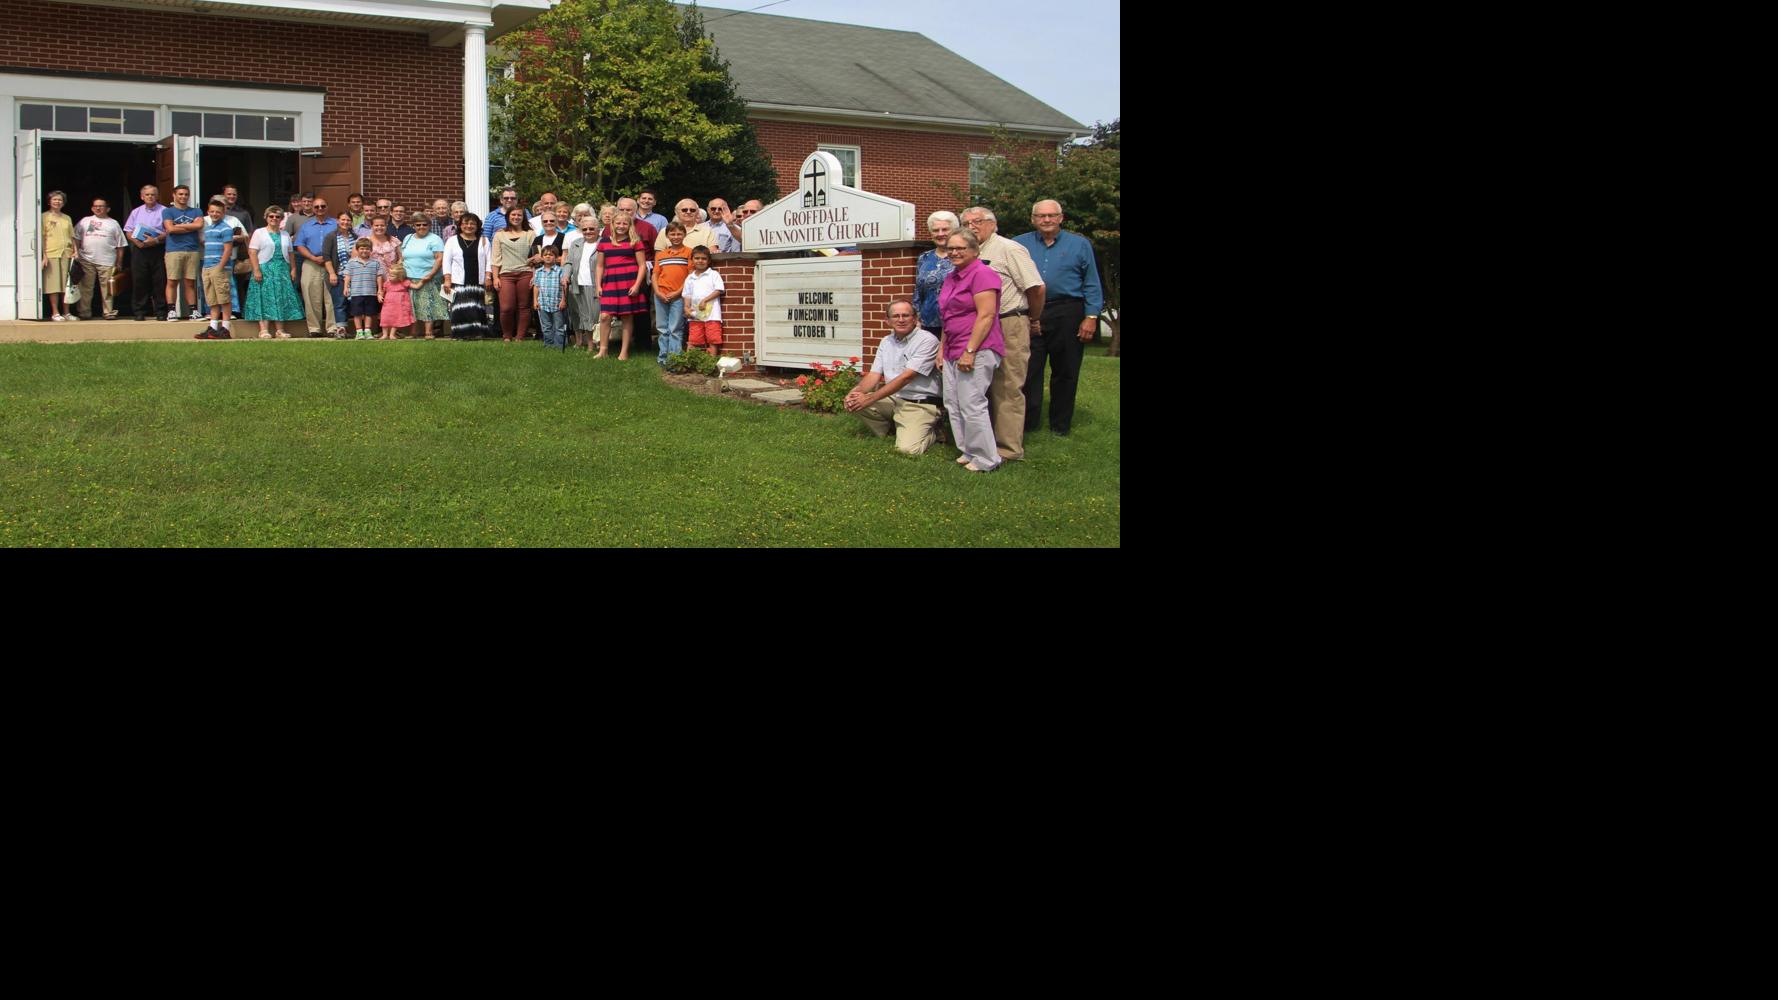 Mennonite churches celebrate a movement that began in Lancaster County